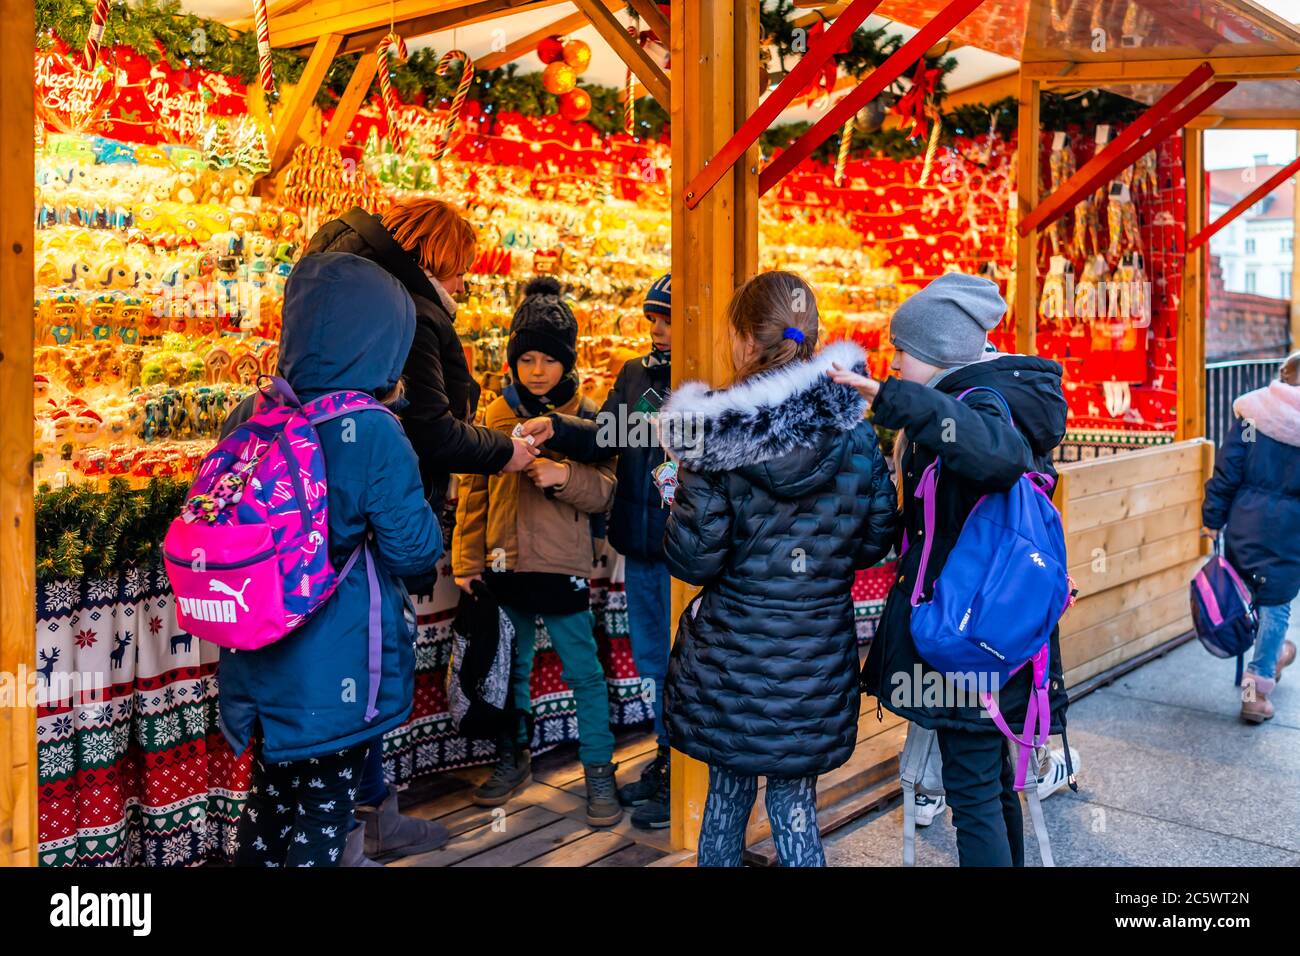 Warsaw, Poland - December 19, 2019: Old town Warszawa Christmas market selling candy sweets and group of young children kids people shopping wanting f Stock Photo